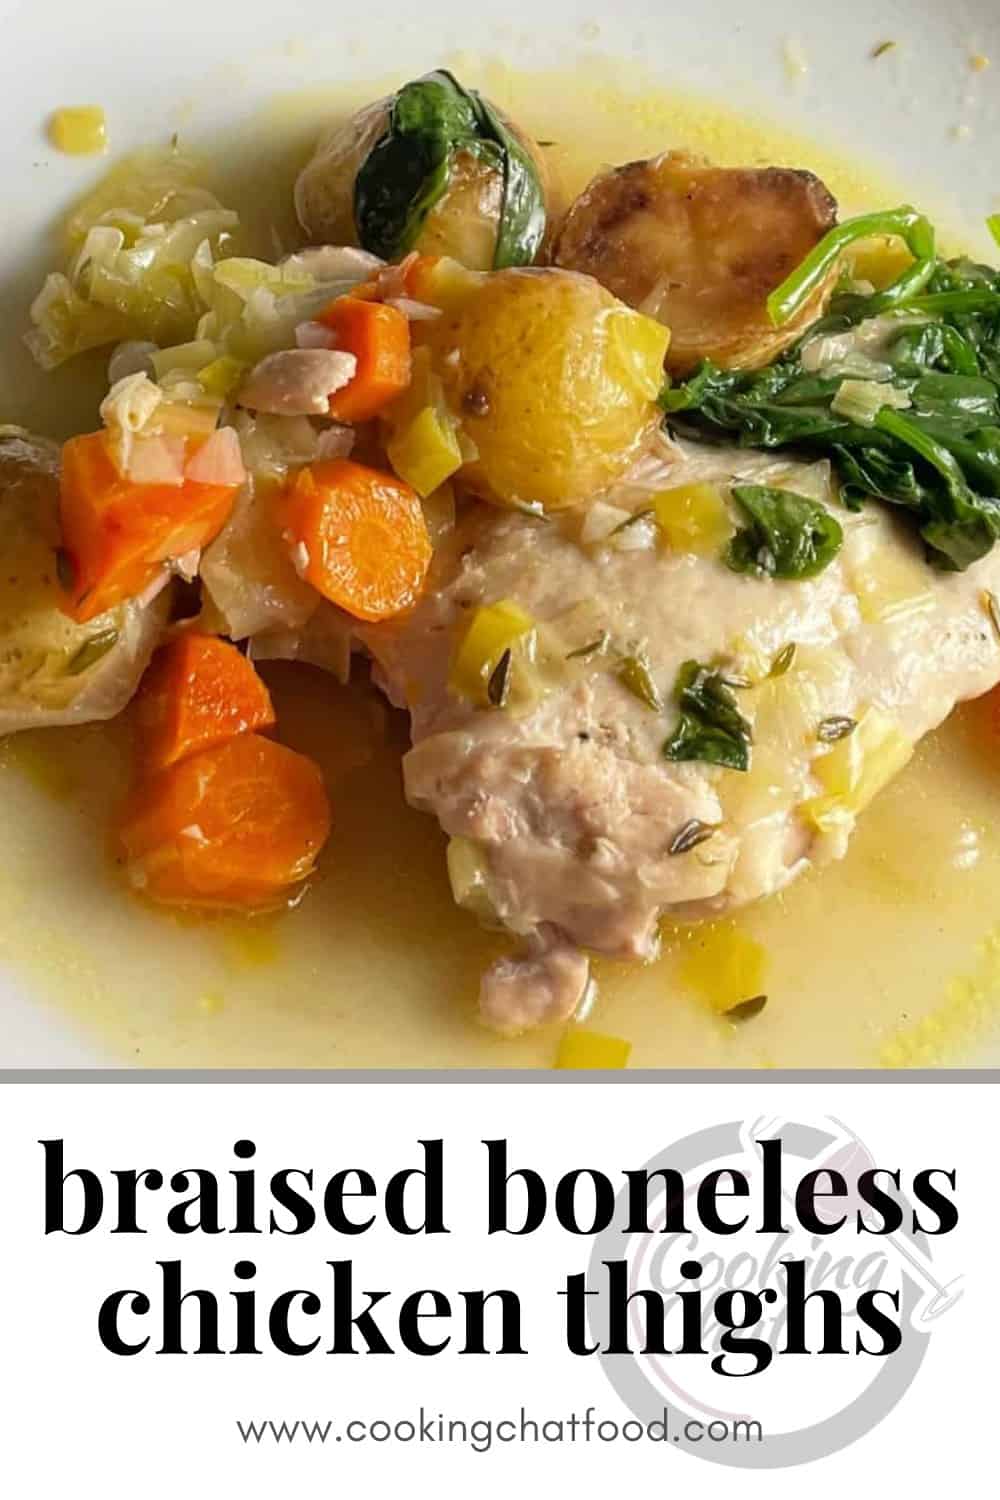 braised chicken thighs with carrots and potatoes, with the recipe title spelled out in text below the photo.